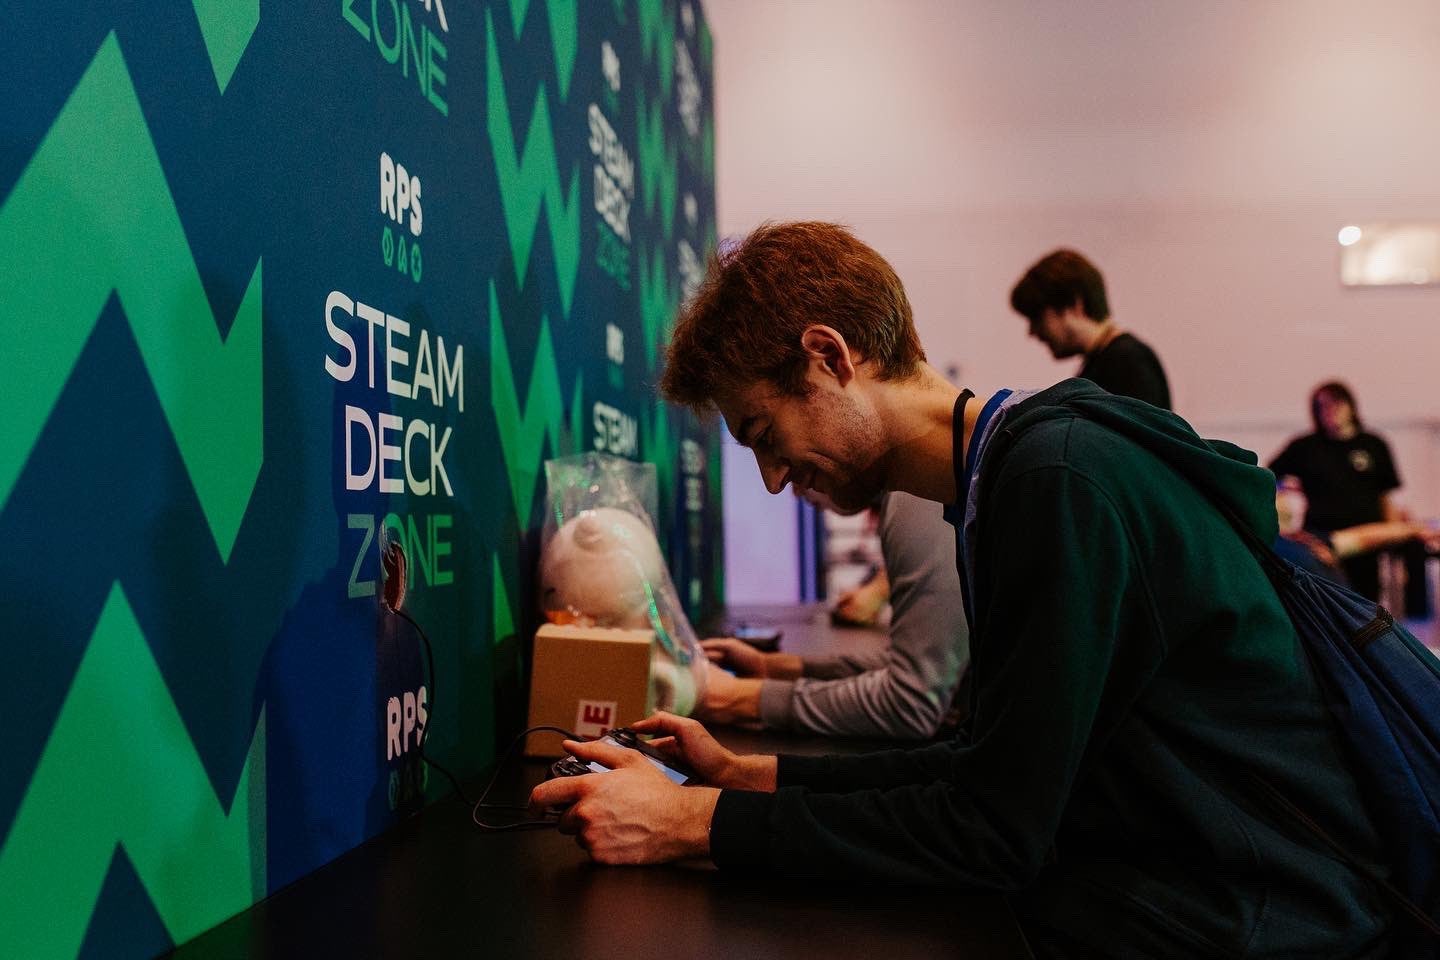 A photo of people playing Steam Decks in the RPS Steam Deck Zone at EGX London 2022.